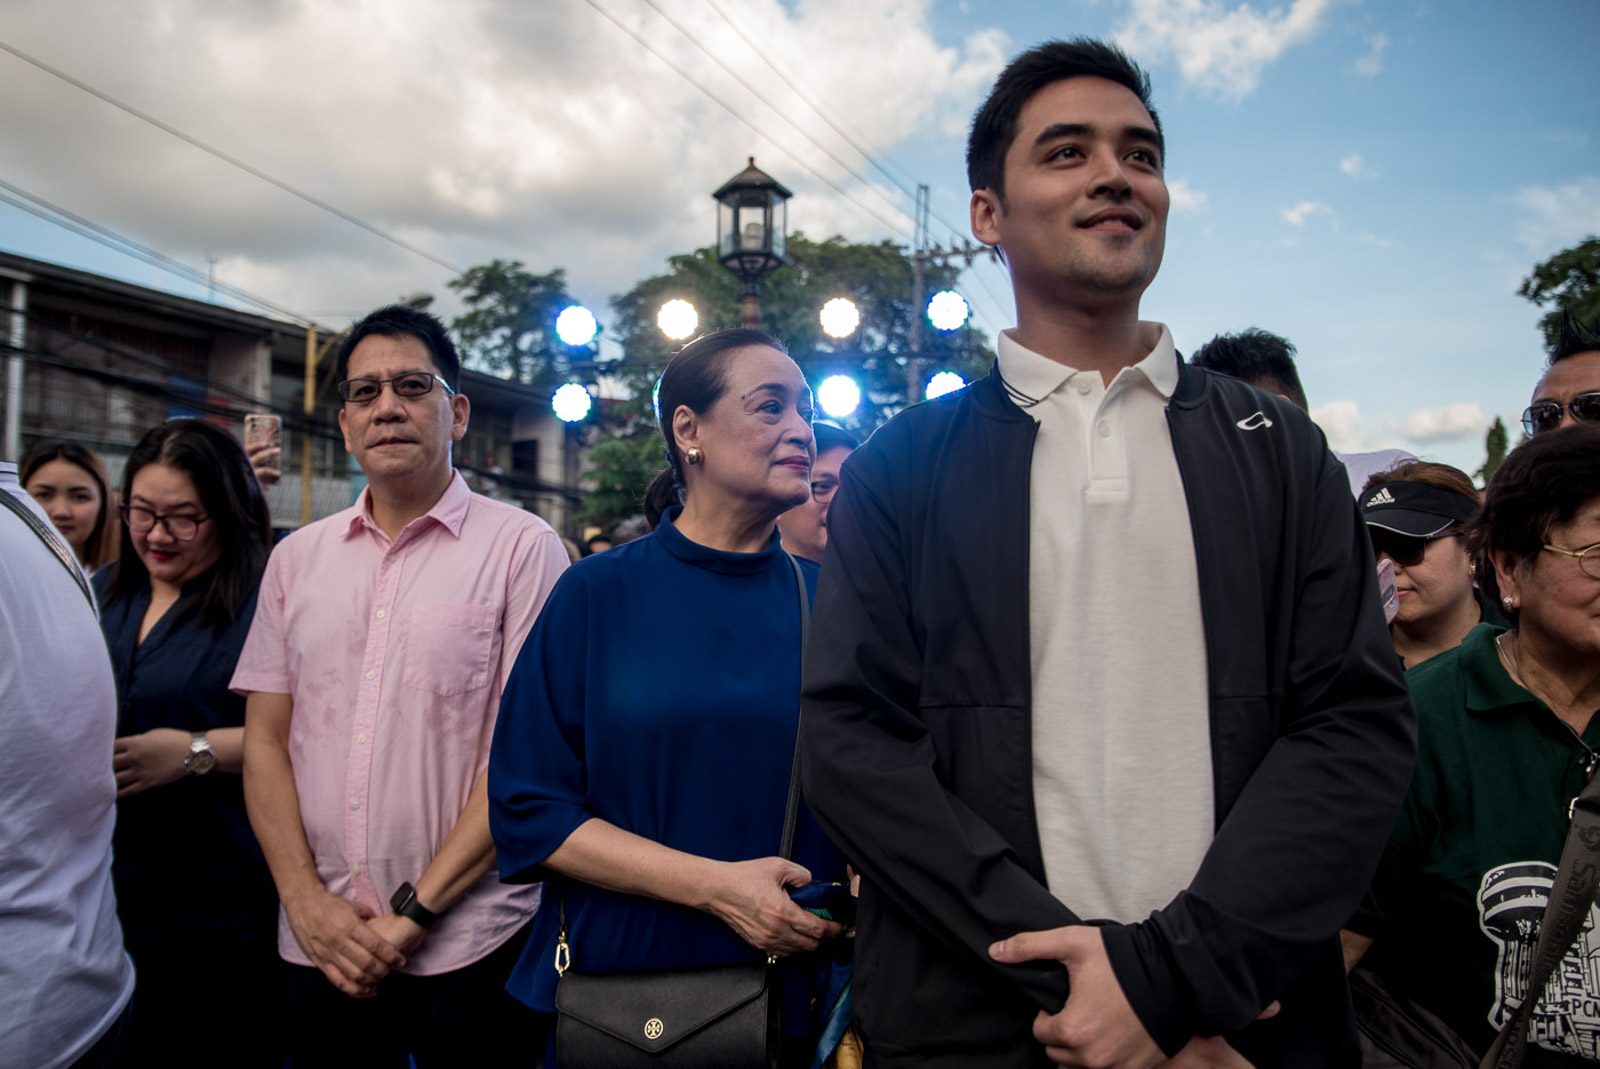 Vico Sotto: I will always just do what I believe is right